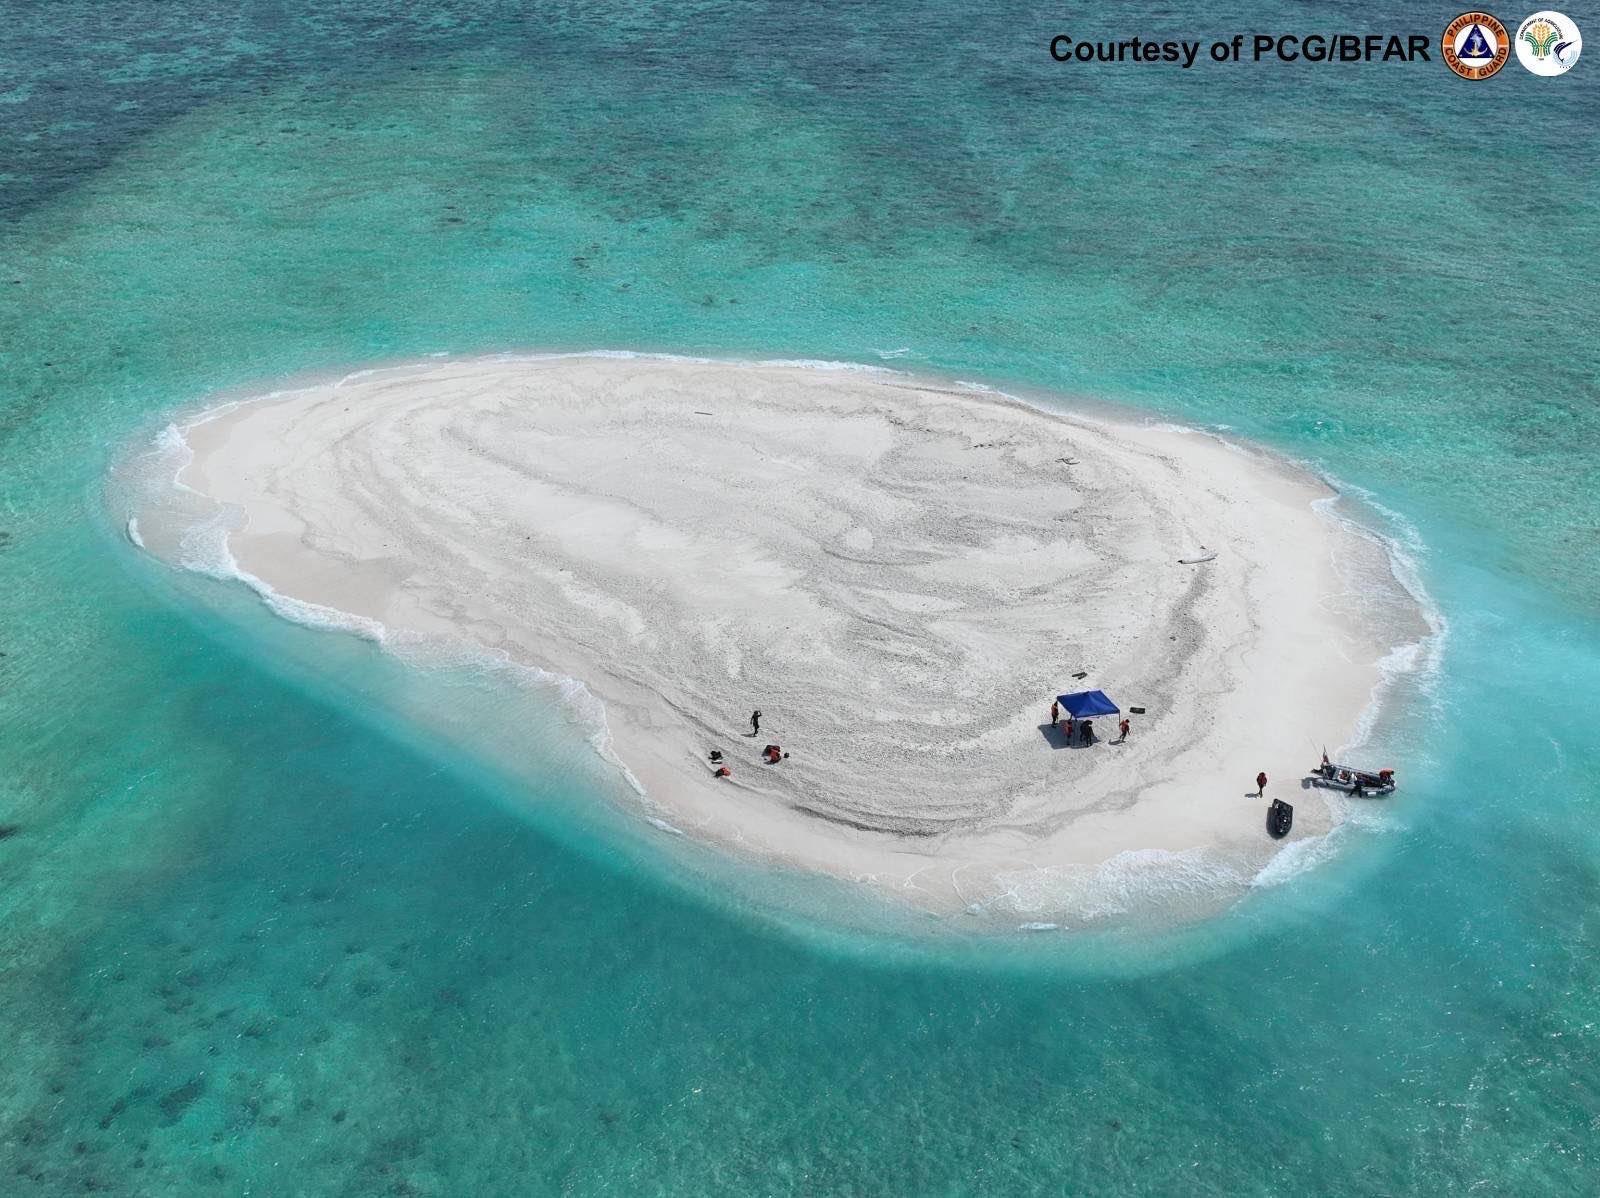 The Philippine Coast Guard (PCG) on Friday criticized China for employing what it described as "intimidation tactics" against Filipino scientists conducting research in the West Philippine Sea.